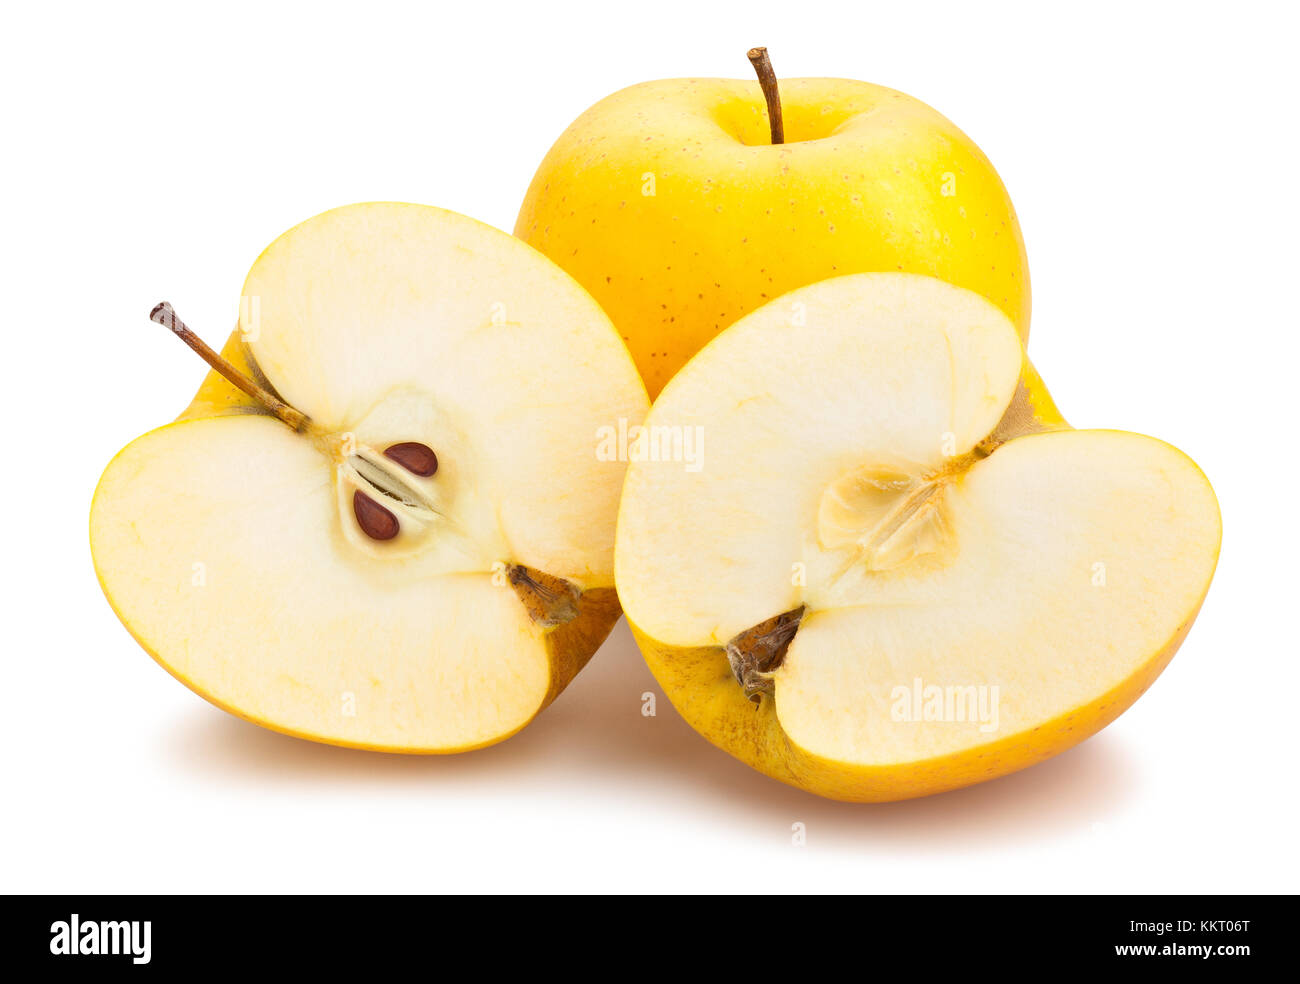 sliced apples path isolated Stock Photo - Alamy